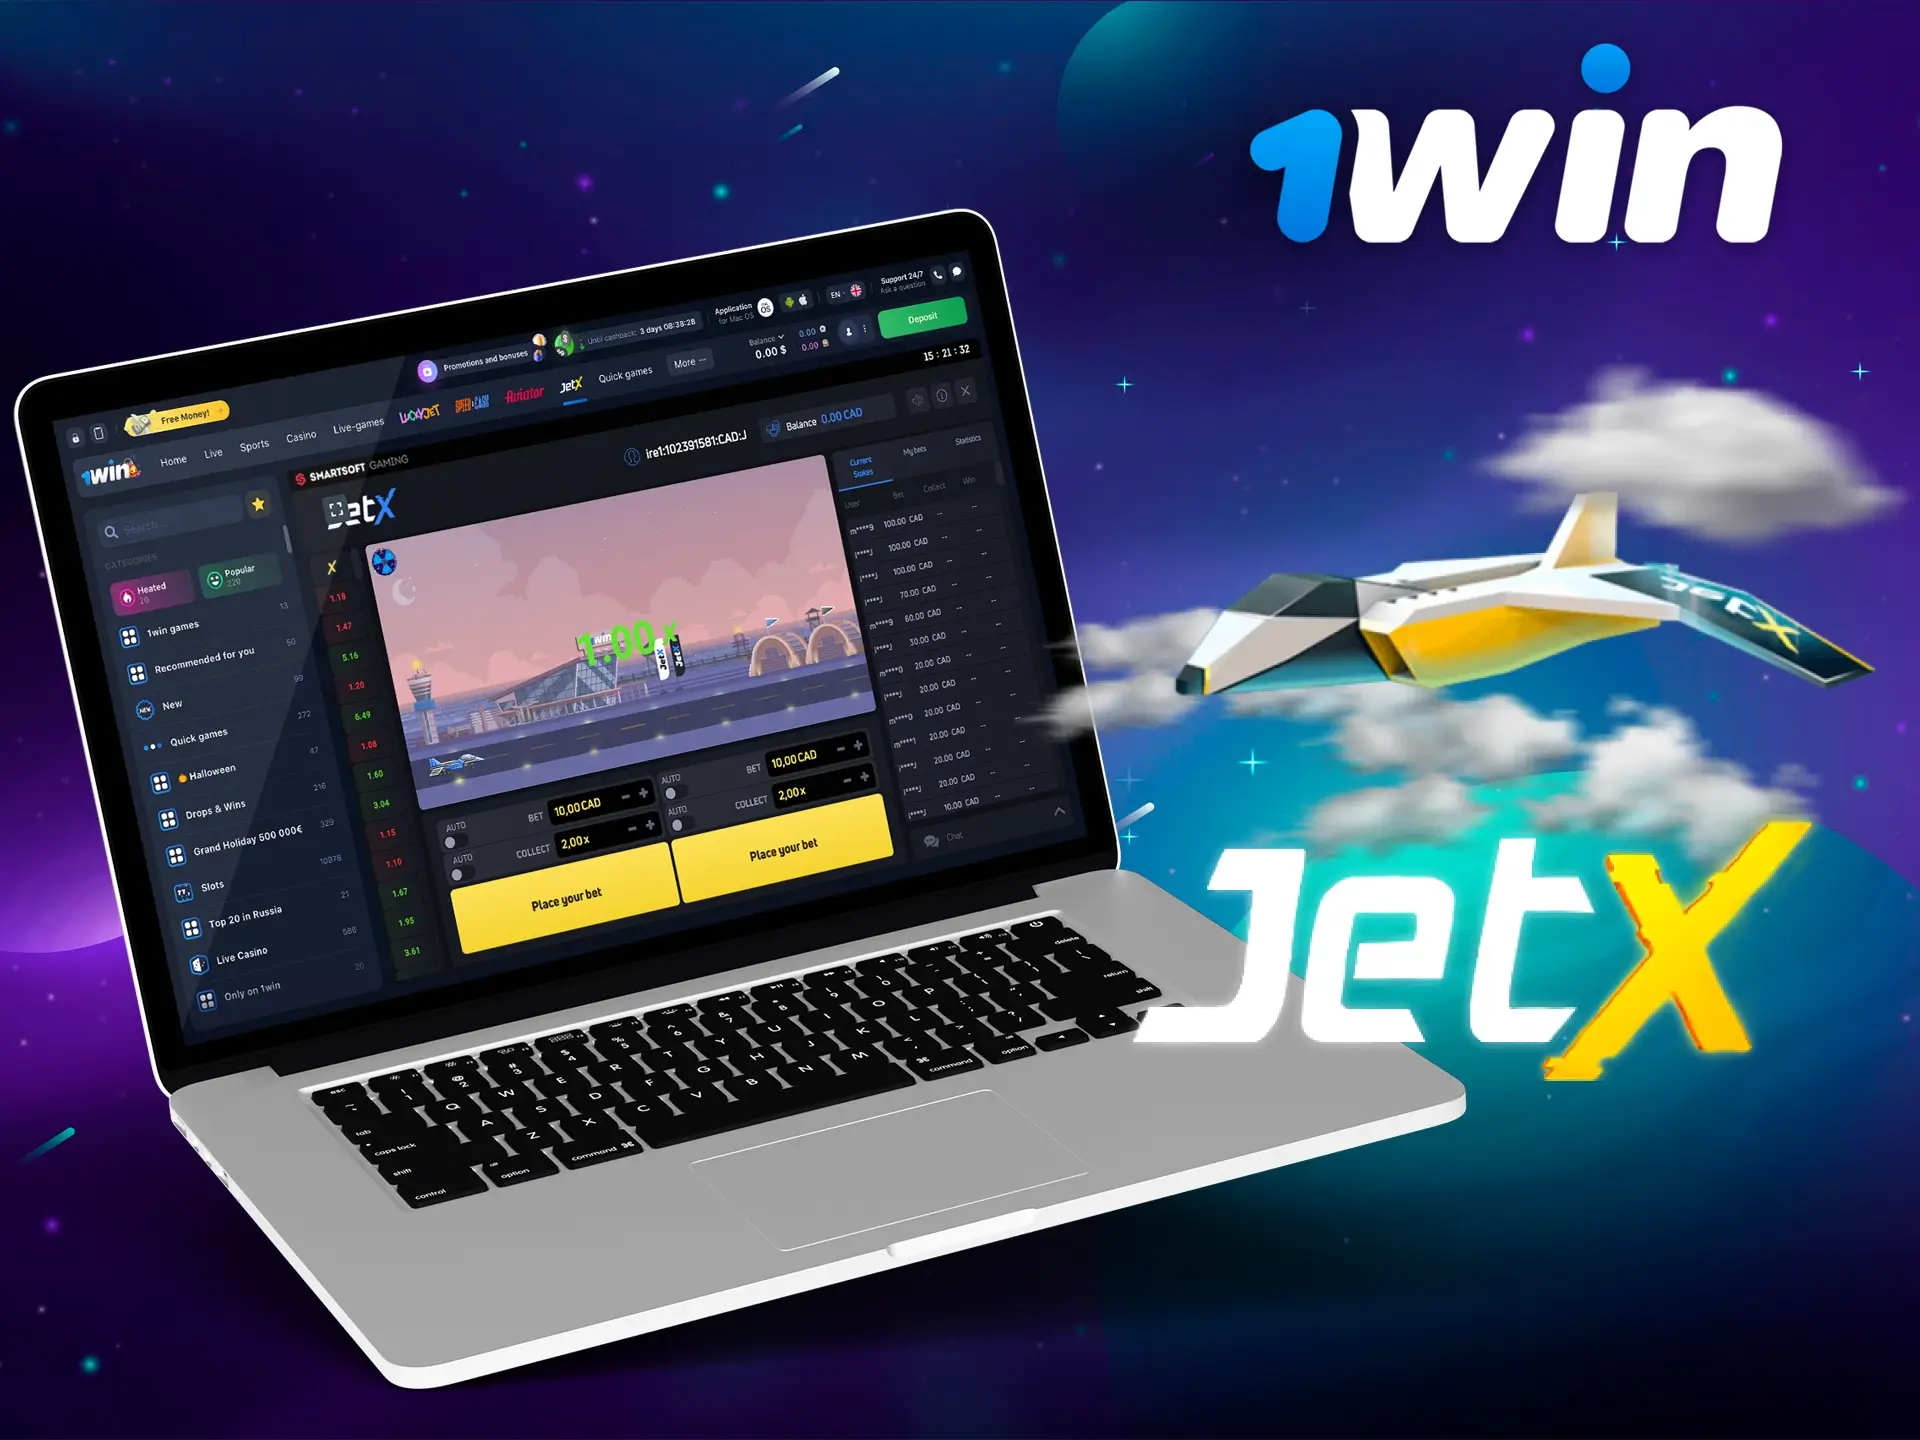 There are many different methods of winning at Jetx.